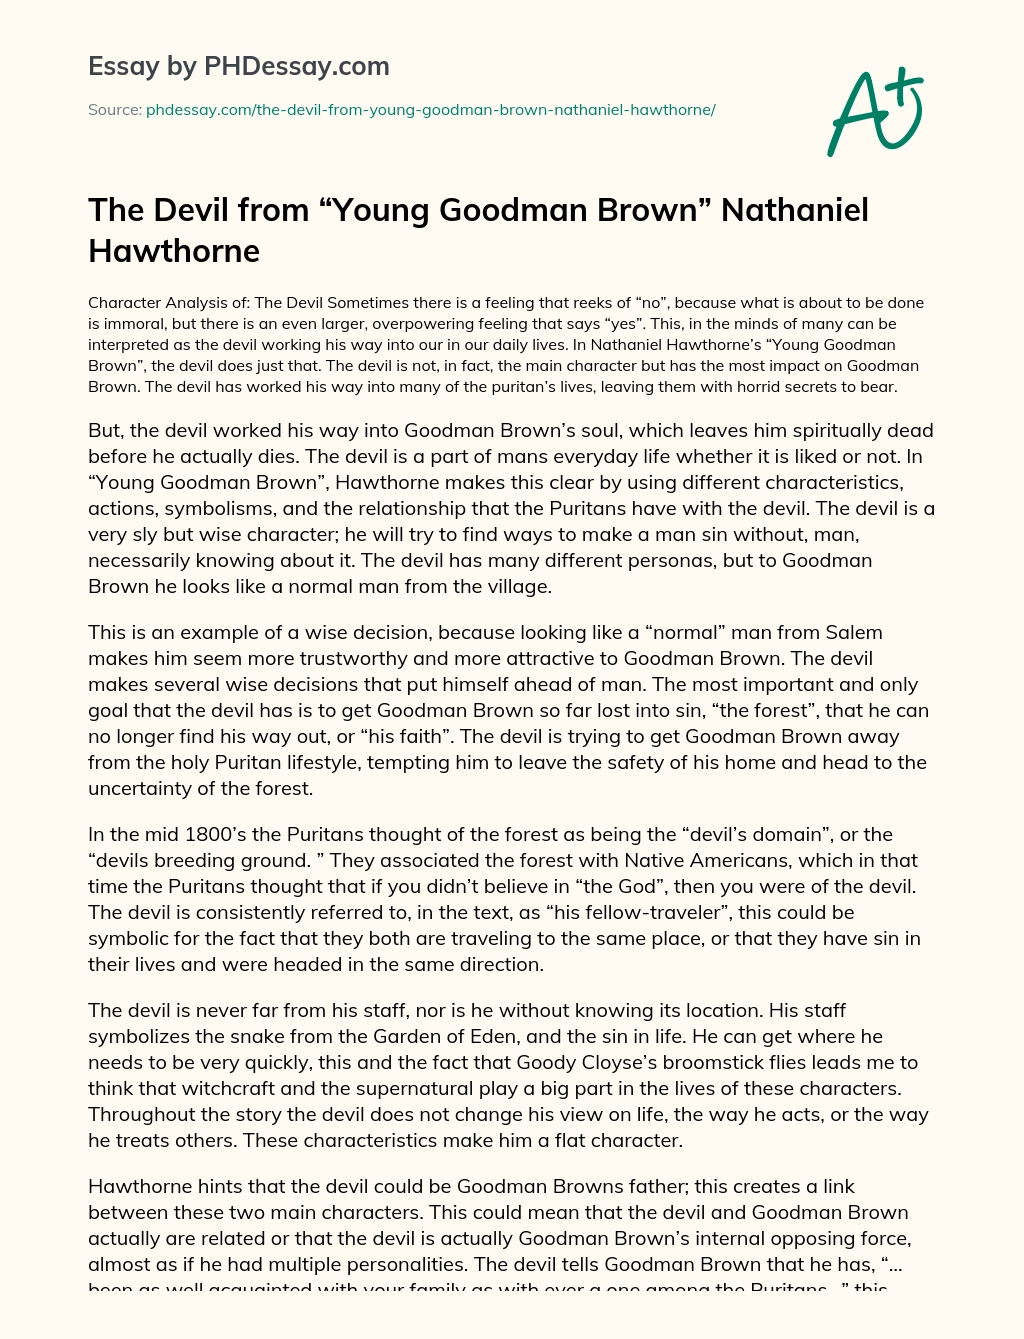 The Devil from “Young Goodman Brown” Nathaniel Hawthorne essay